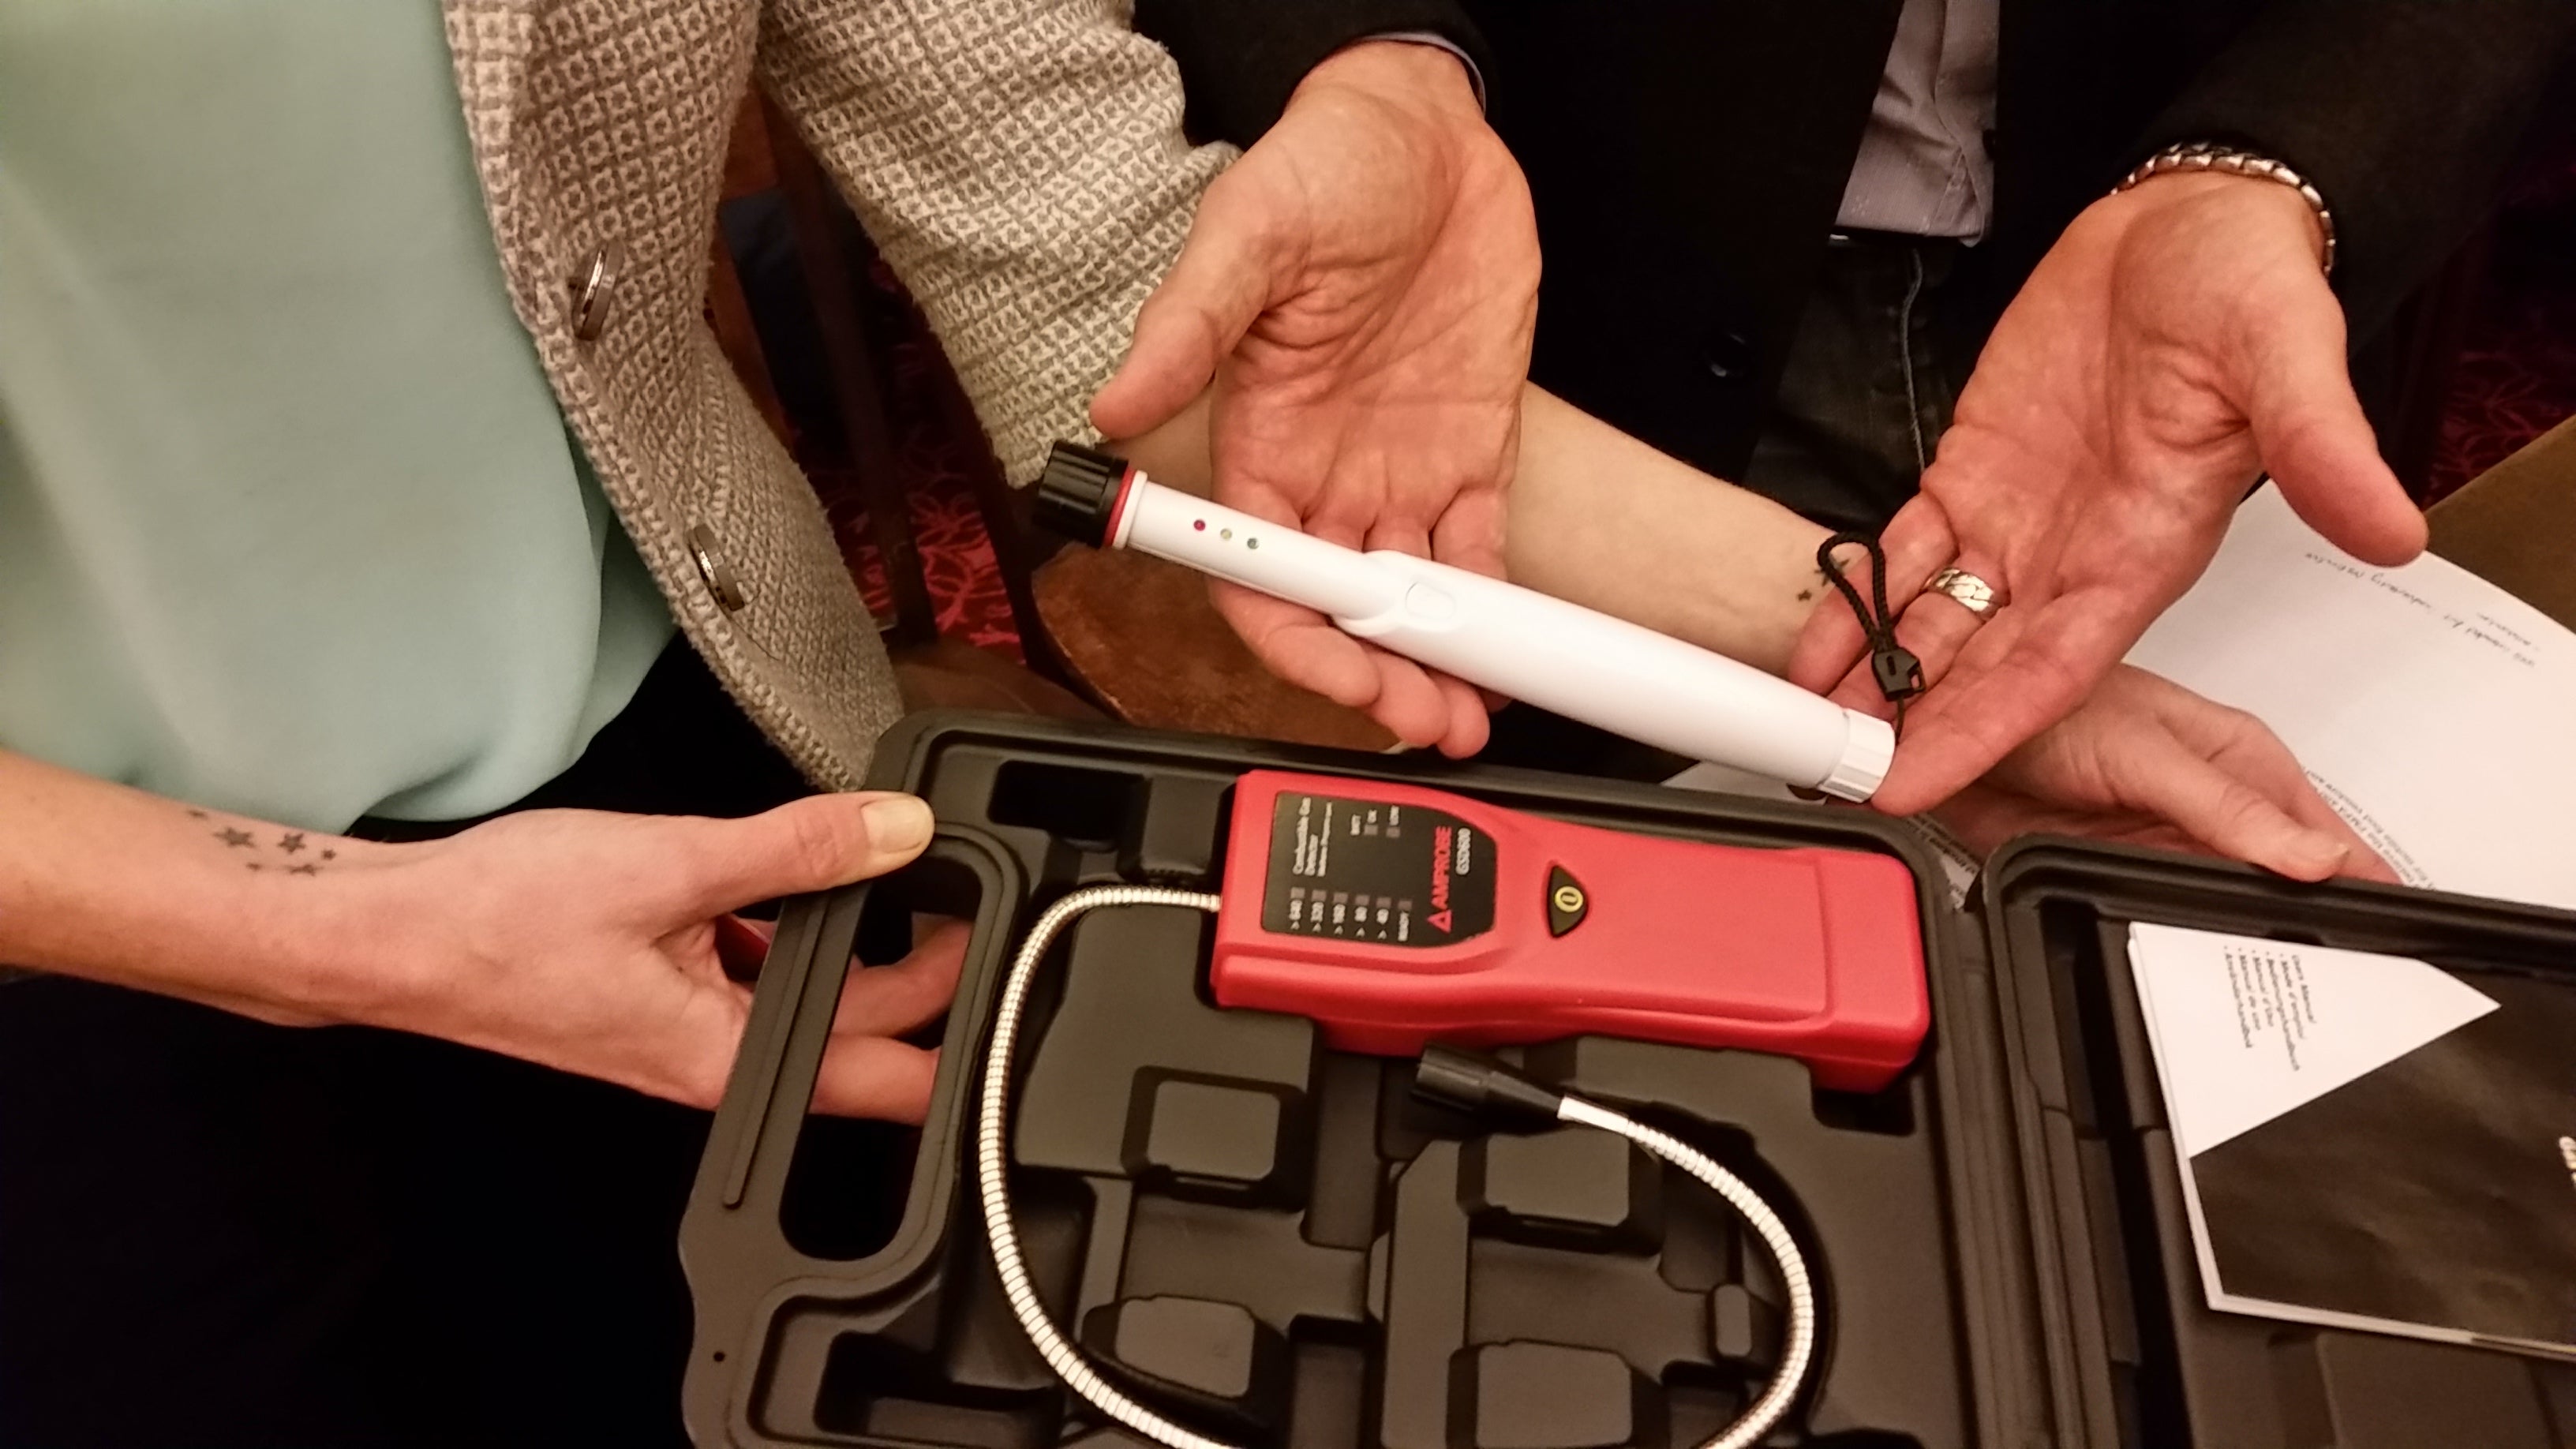  Propane gas detectors are exhibited at a City Council hearing. (Tom MacDonald/WHYY) 